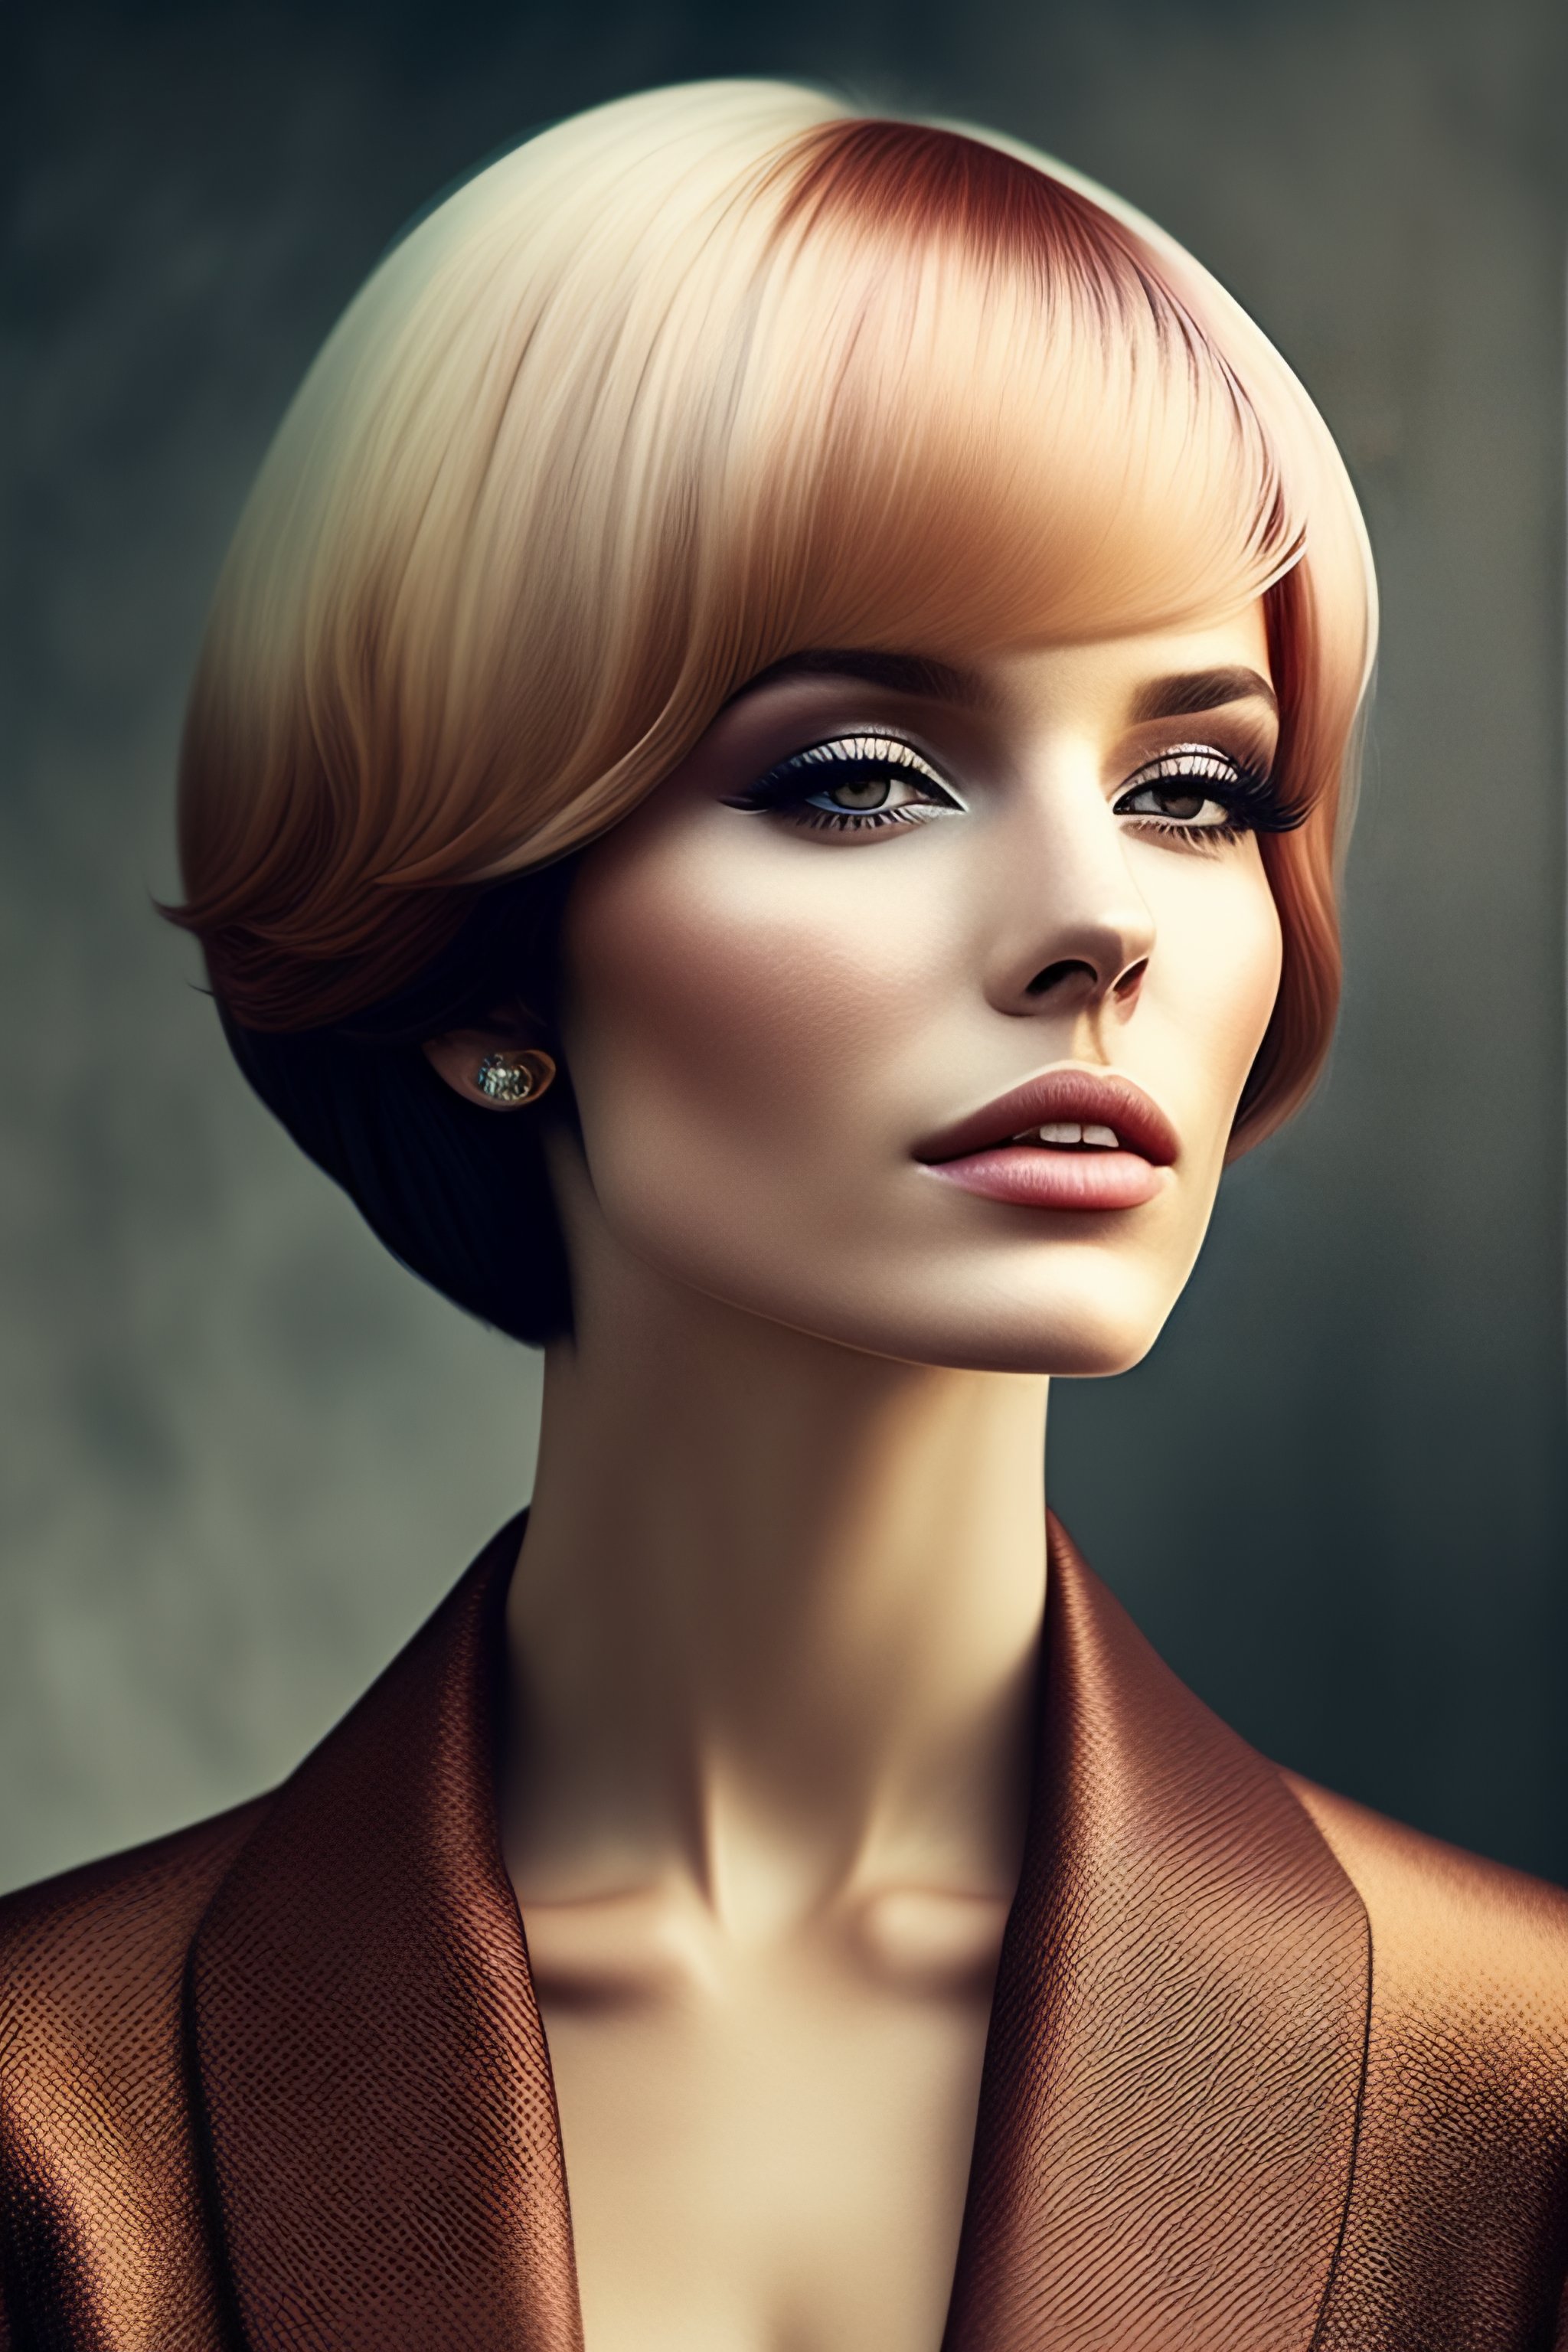 Lexica - Analog style picture of a beautiful russian girl, short bob fringe  hair garden